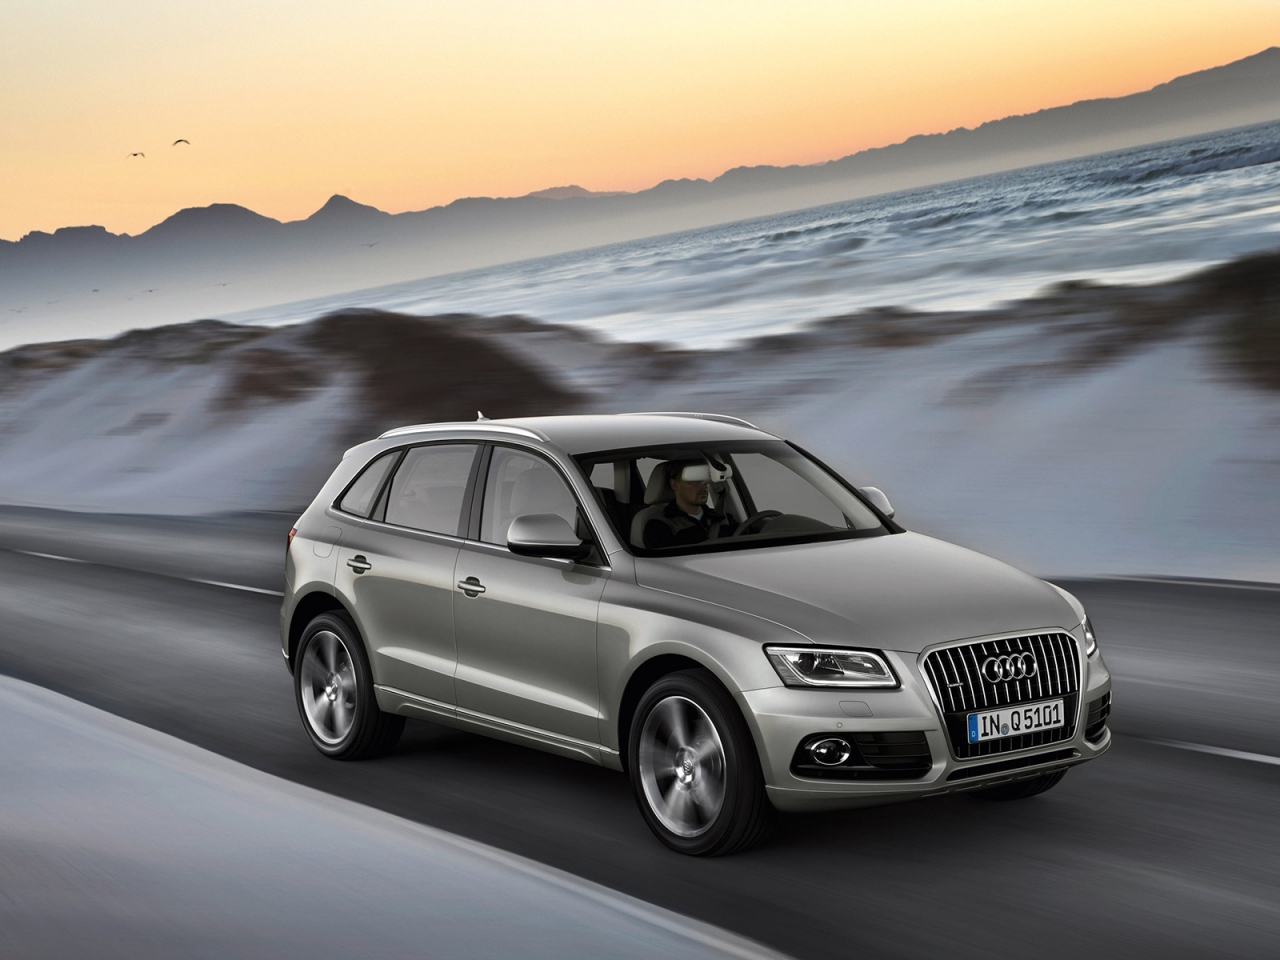 2013 Audi Q5 for 1280 x 960 resolution